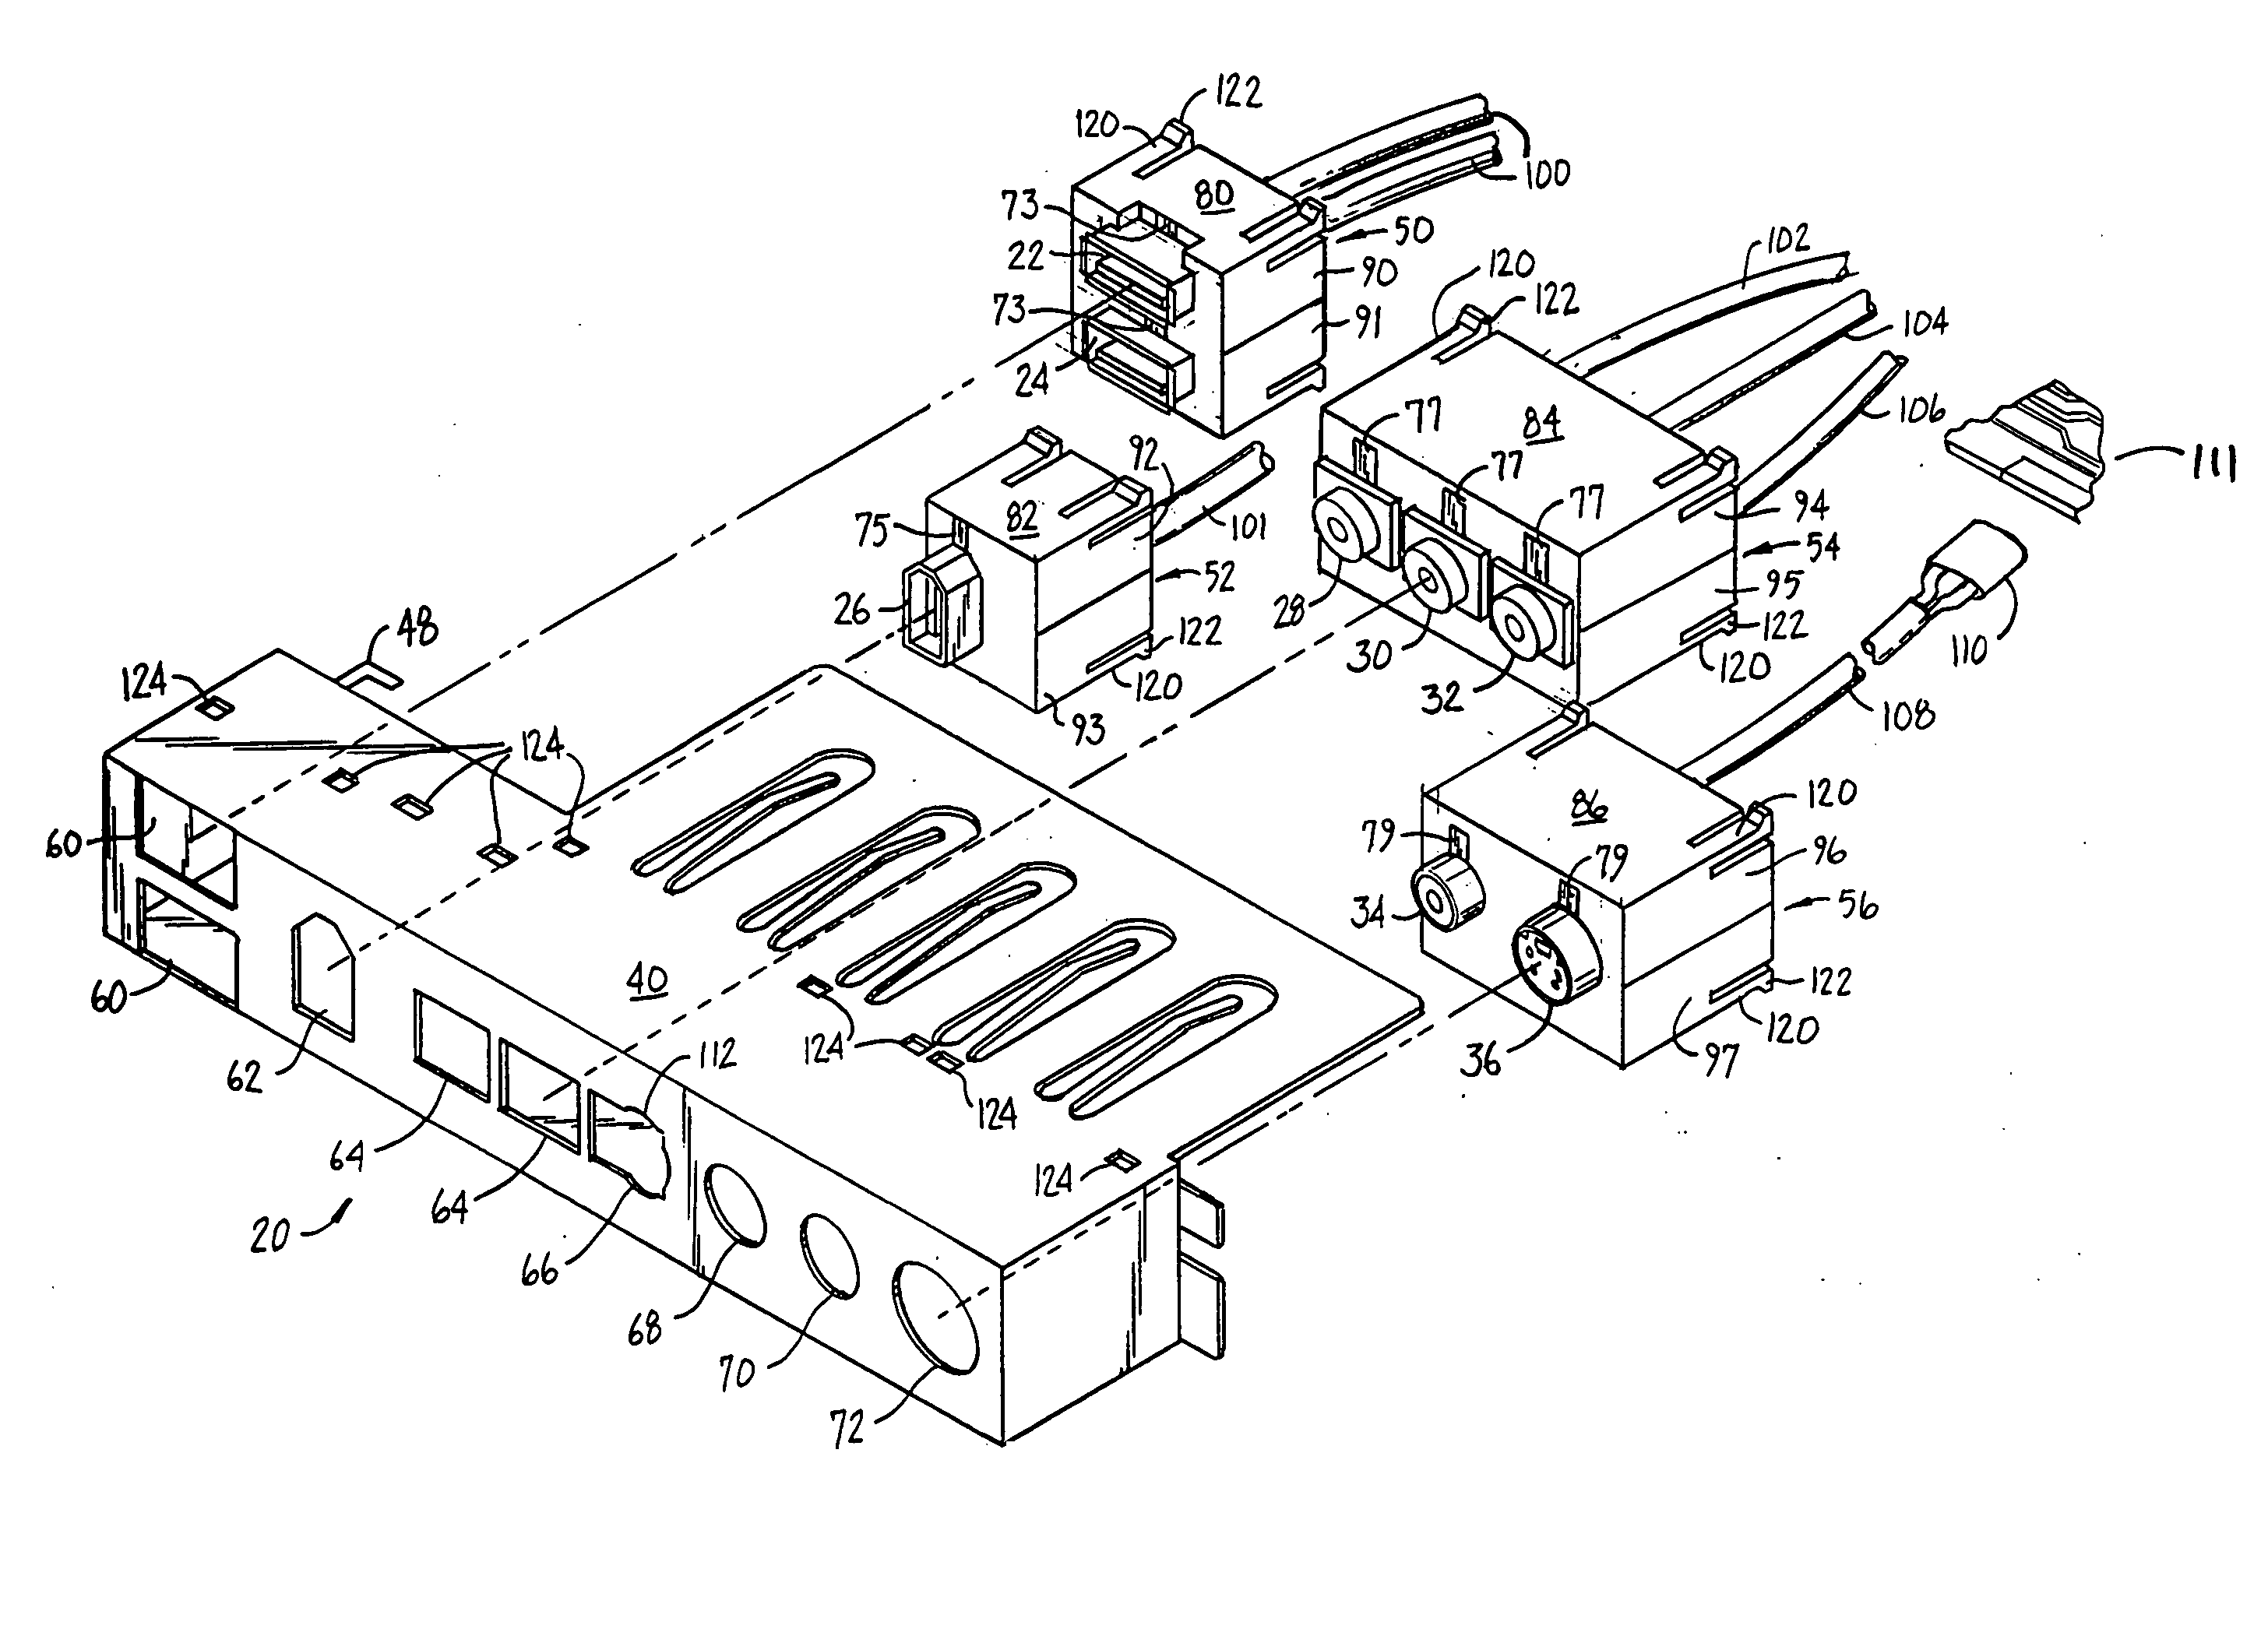 Computer input/output connector assembly